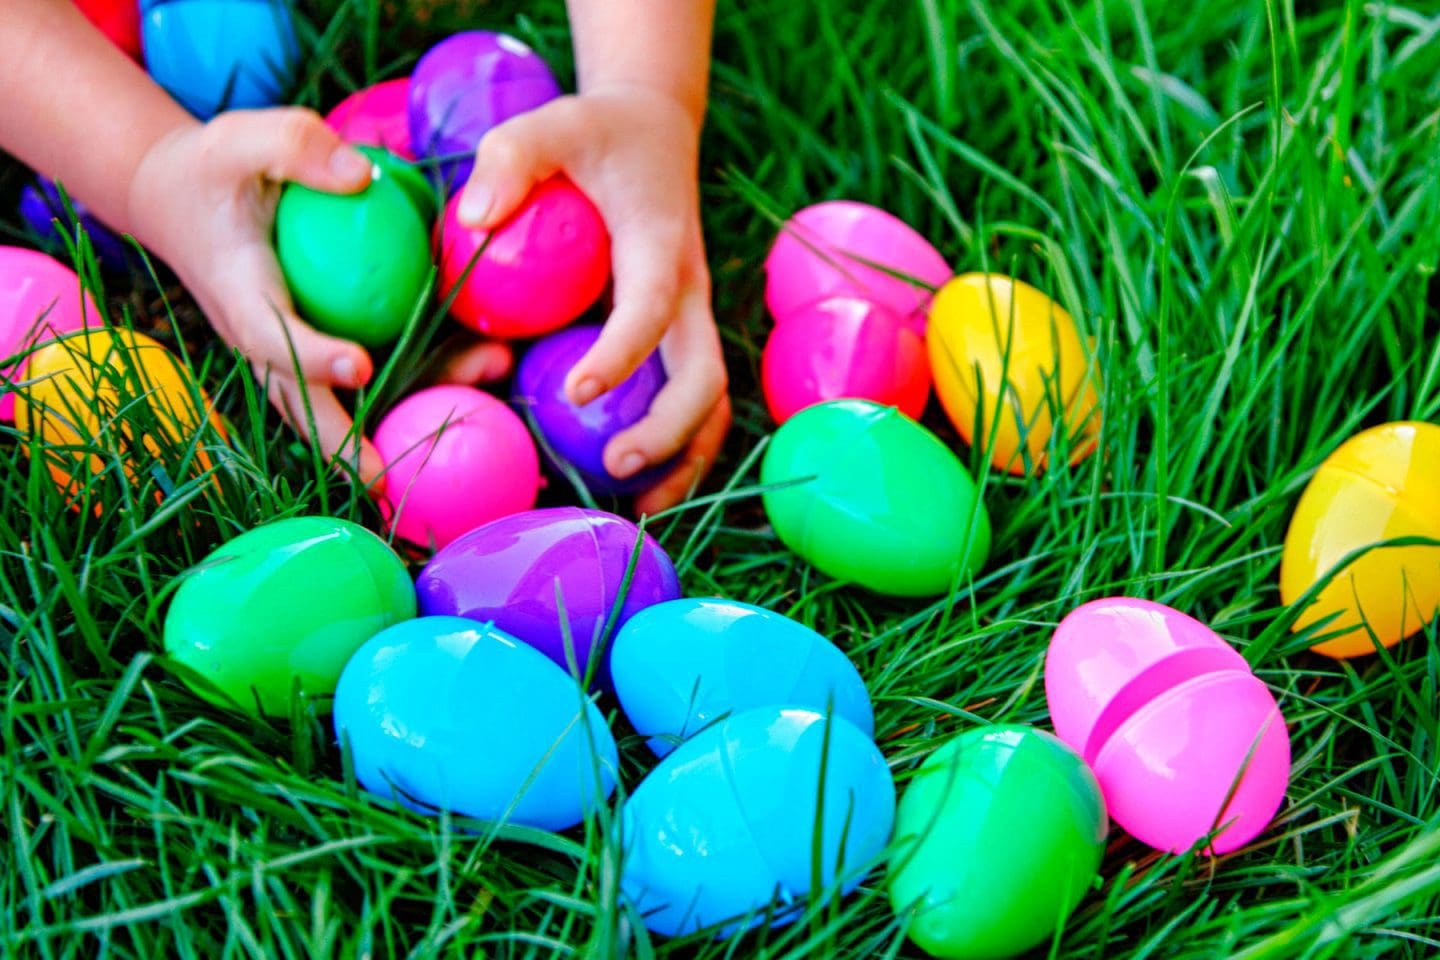 Fun Things to Do in & Around Guelph for Easter